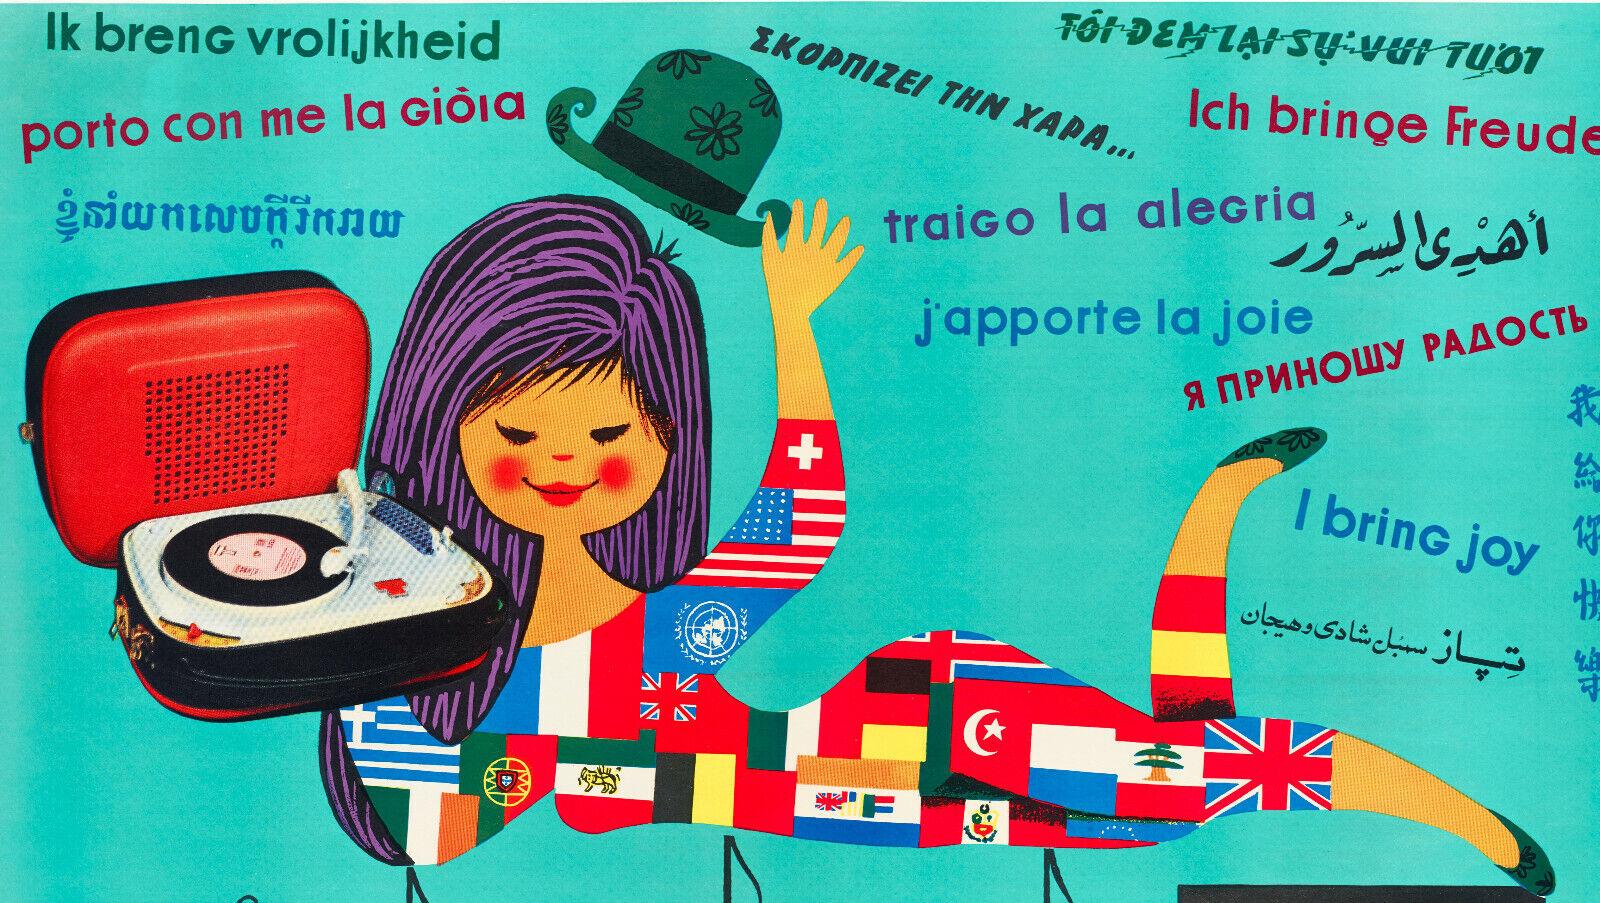 Original Vintage Poster-Gauthier-Teppaz-Record Player-Lyon-Musique, c.1960

Poster to promote the Teppaz portable record player.
The poster features a reclining woman dressed in flags, a record player, a sheet of music and the same phrase in